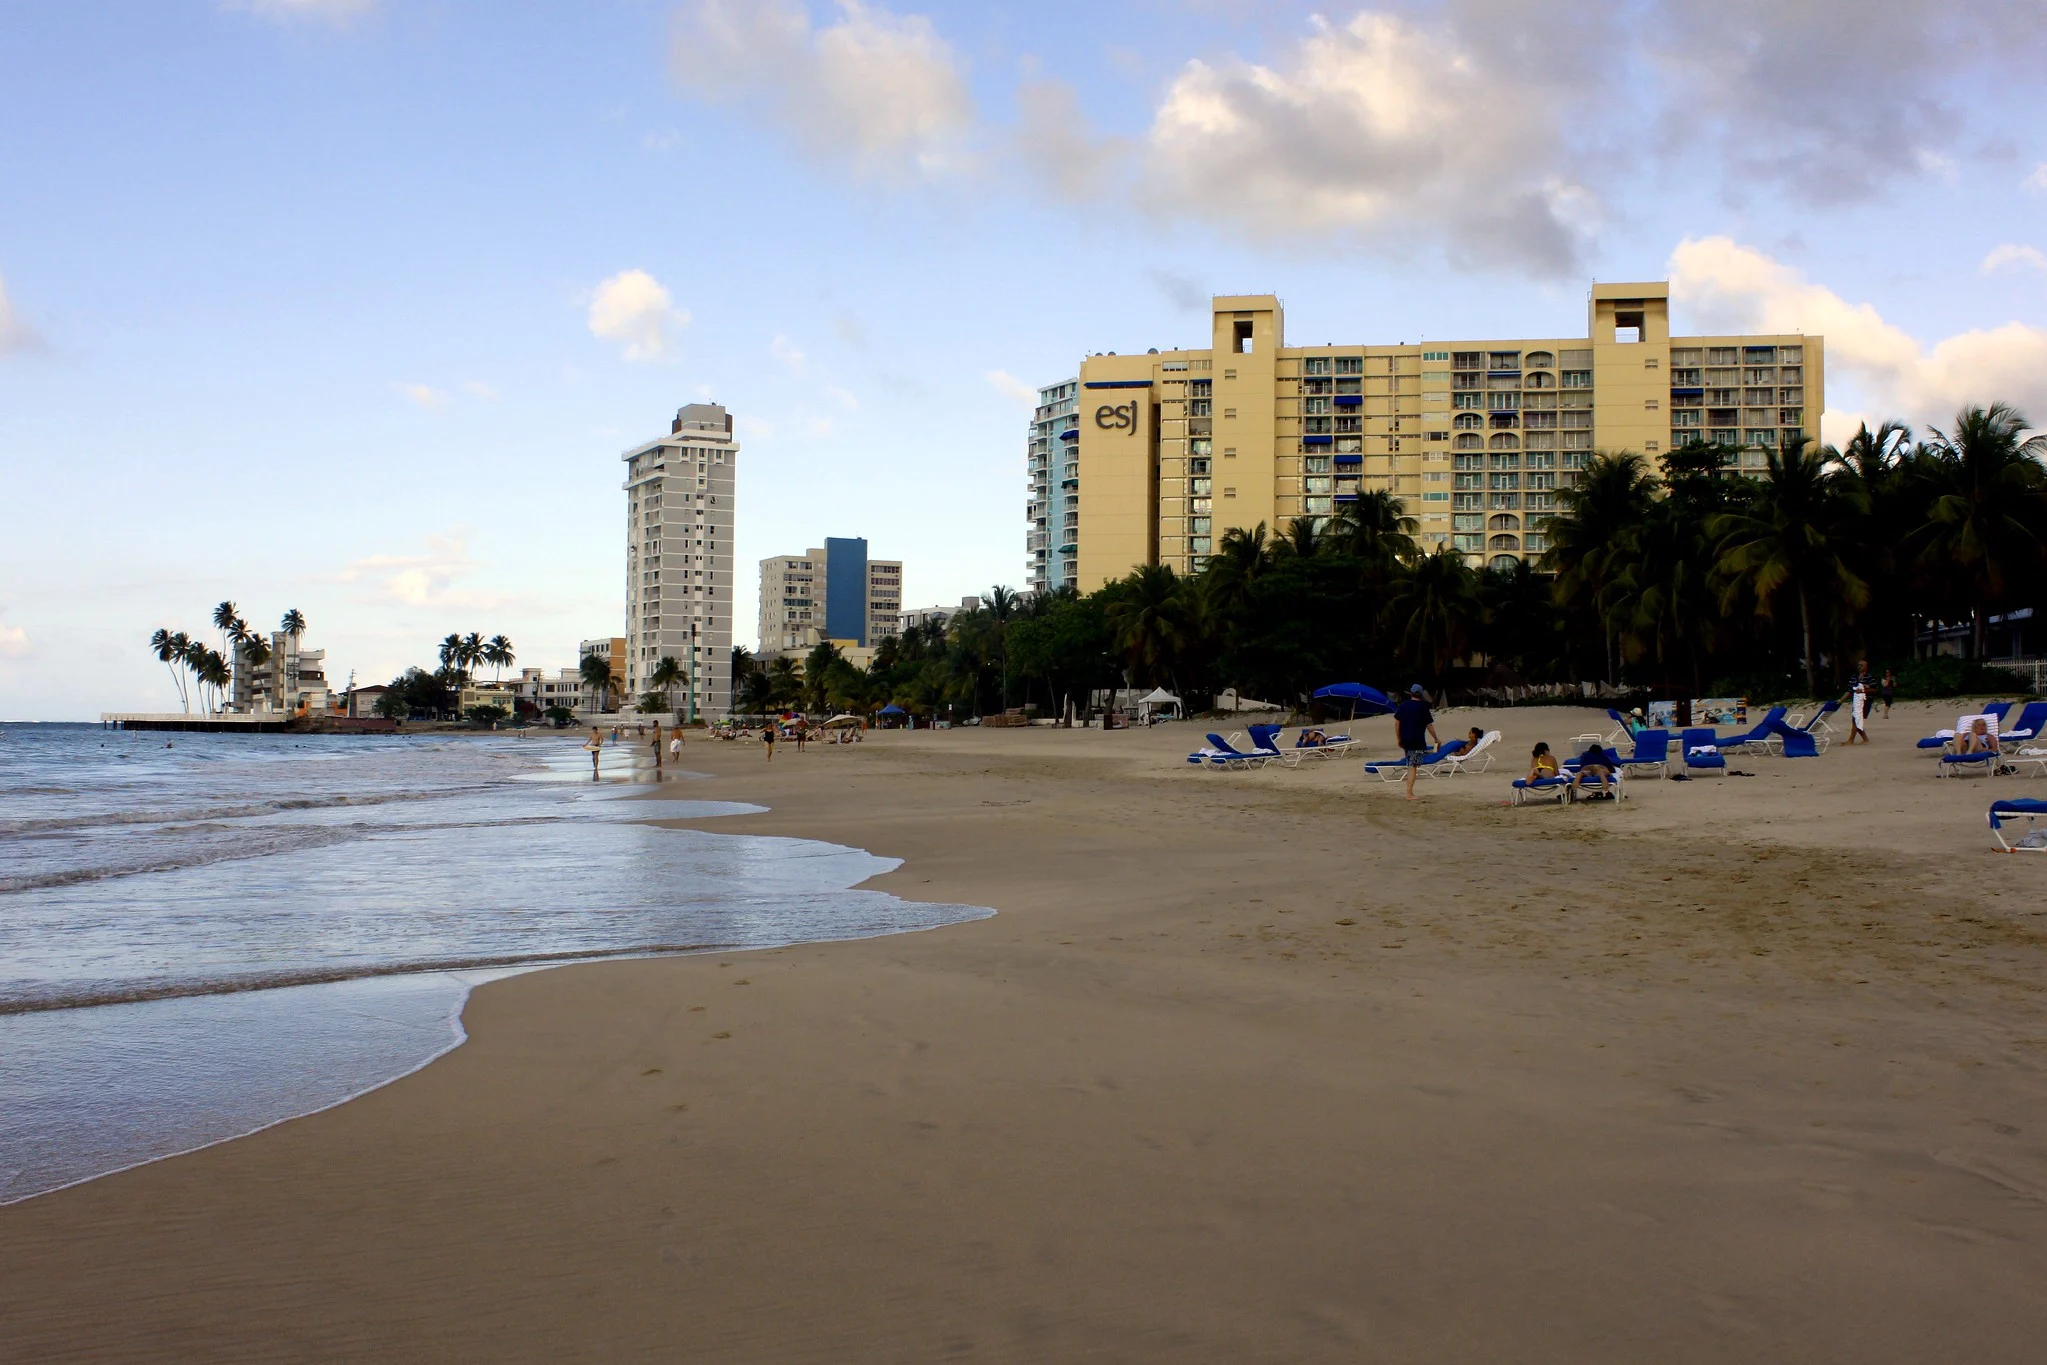 Tourists laying on sun beds at the shore of Playa de Isla Verde, among the best places to visit in Puerto Rico, on a late afternoon, and hotels visible in the background